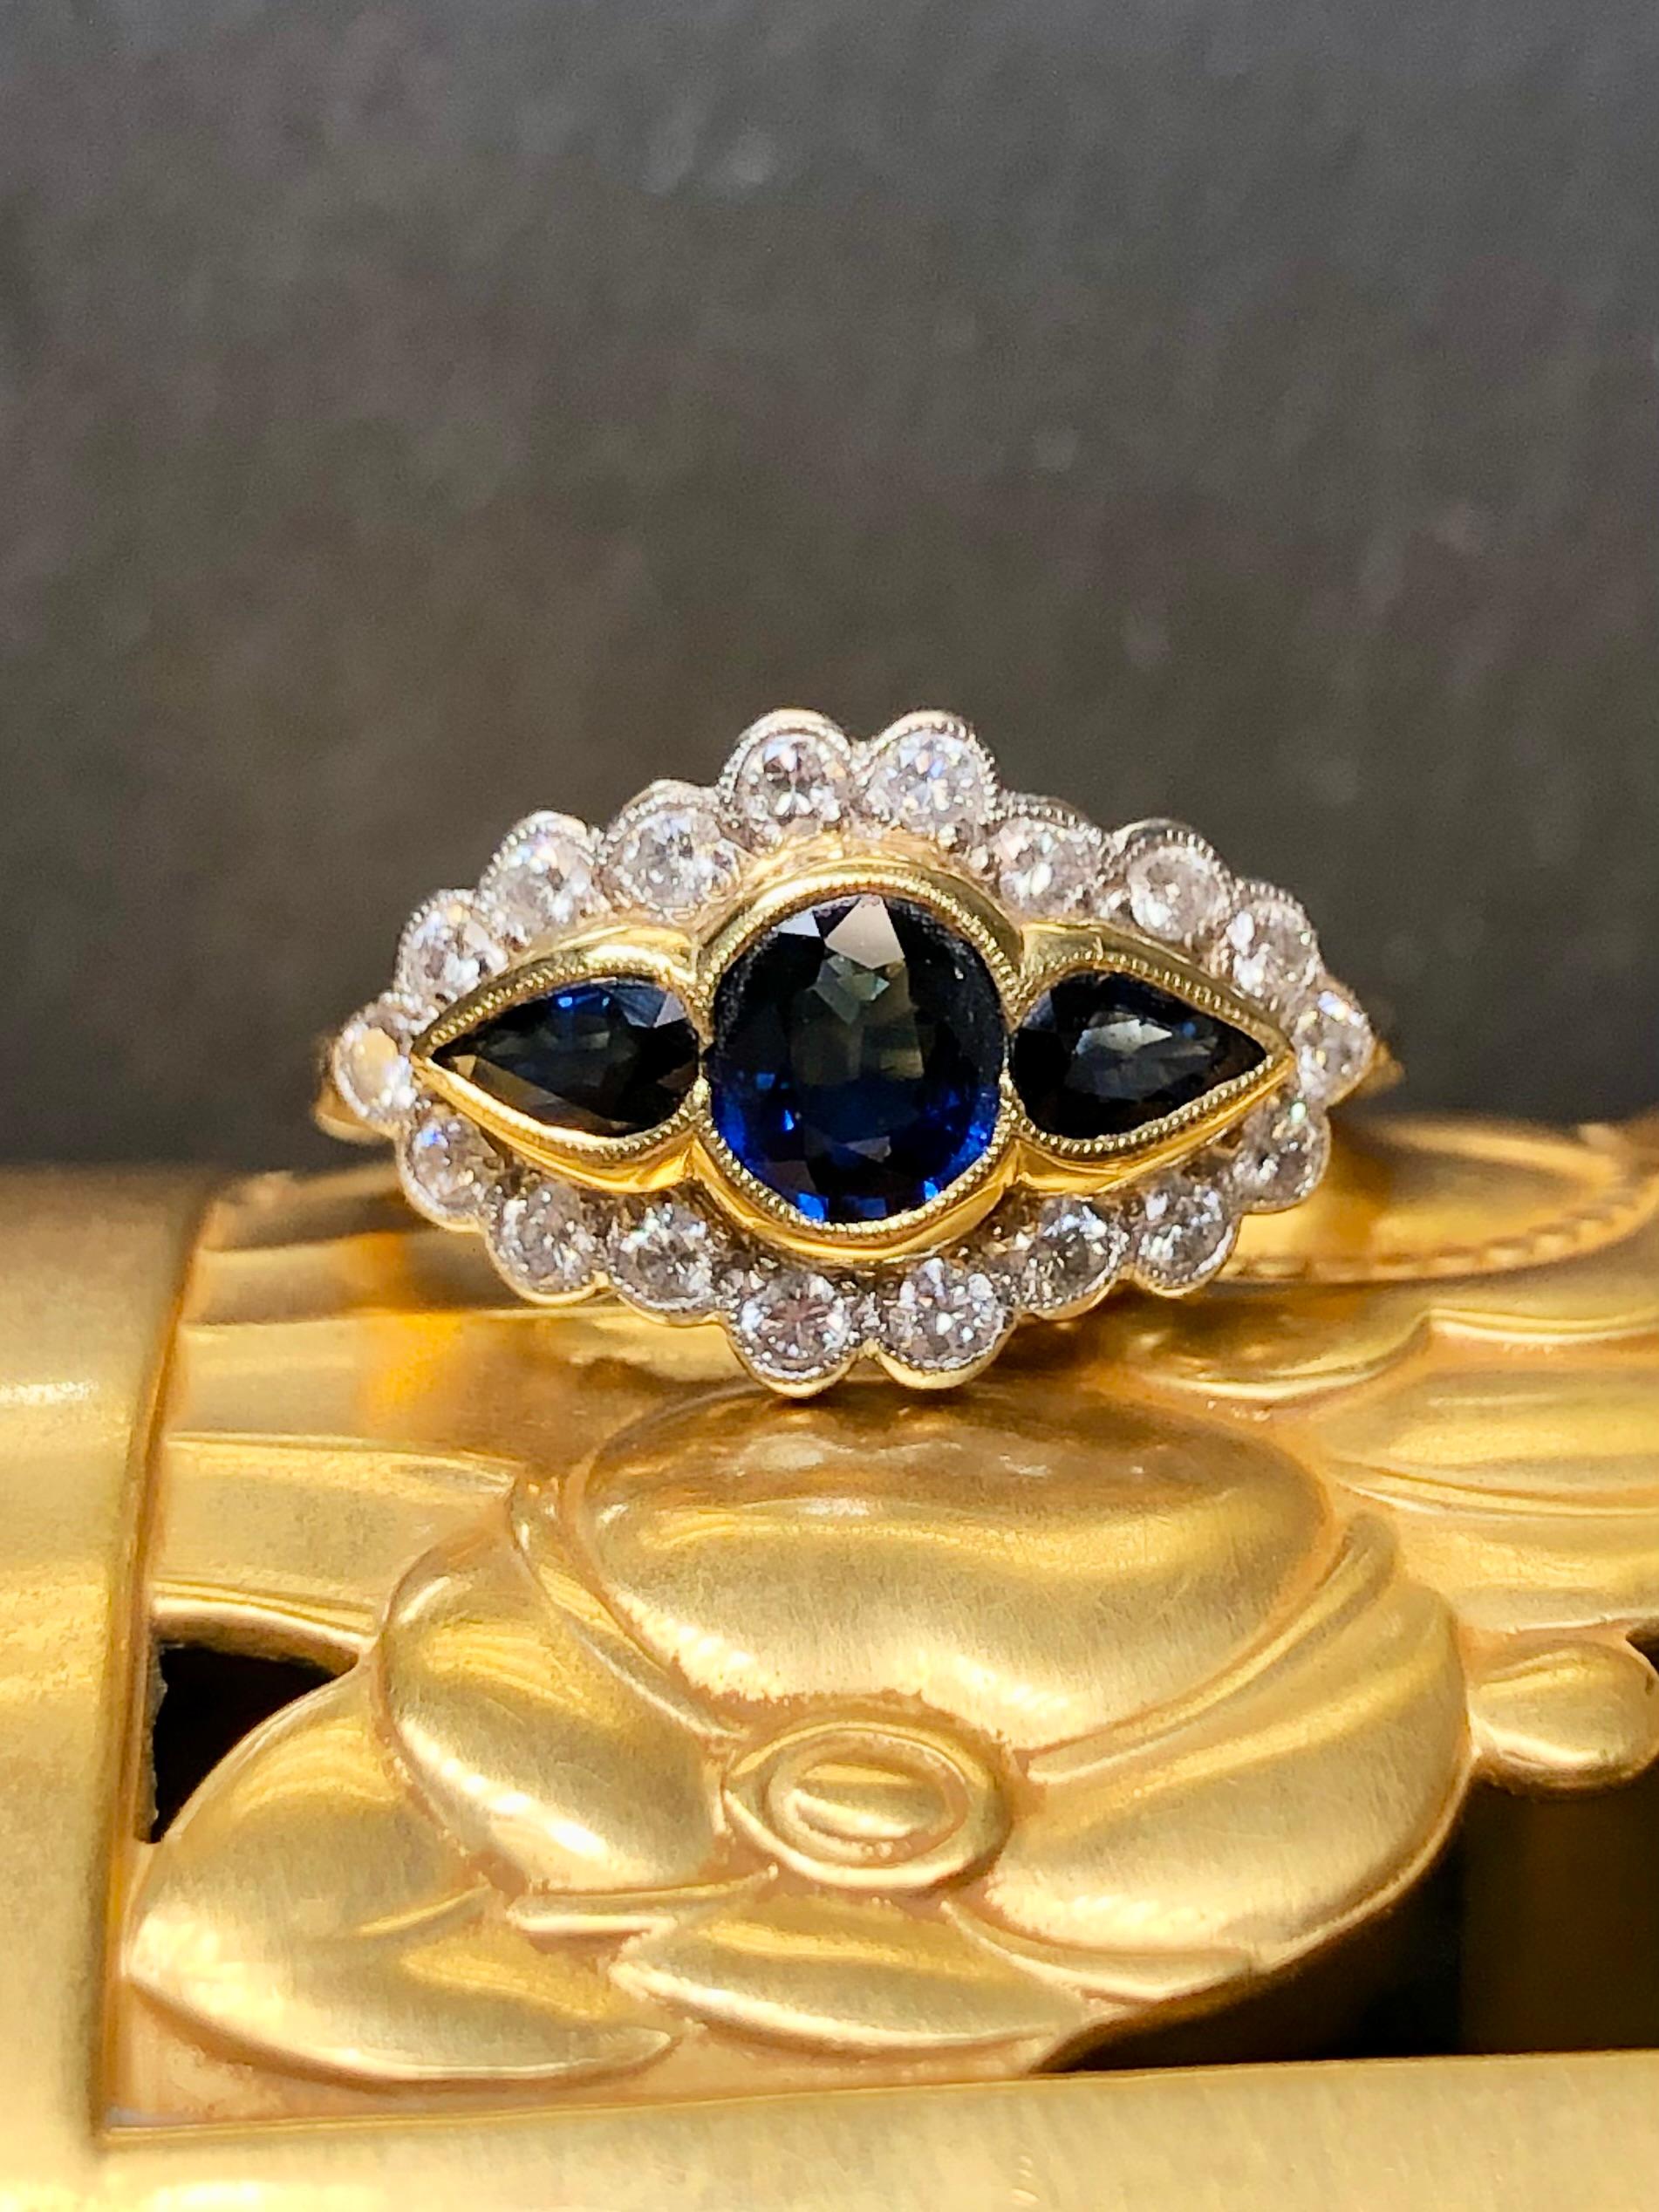 
A finely made 3 stone sapphire and diamond ring crafted in 18K yellow gold topped in platinum. It has been set with three central oval and pear shaped natural sapphires weighing approximately 1.15cttw surrounded by approximately .54cttw in well